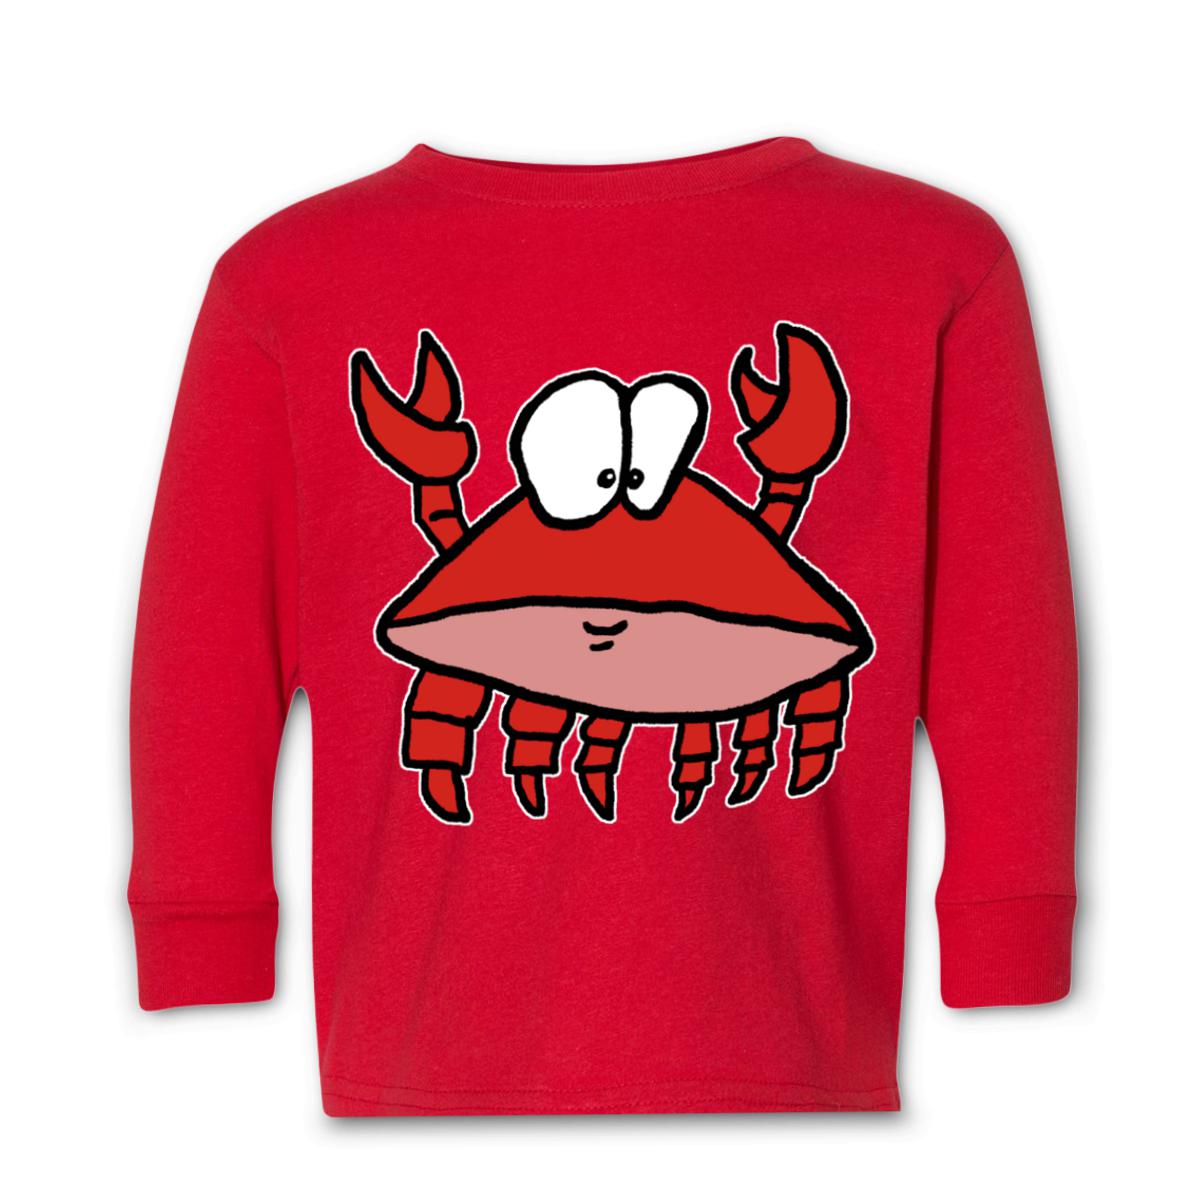 Crab 2.0 Toddler Long Sleeve Tee 2T red